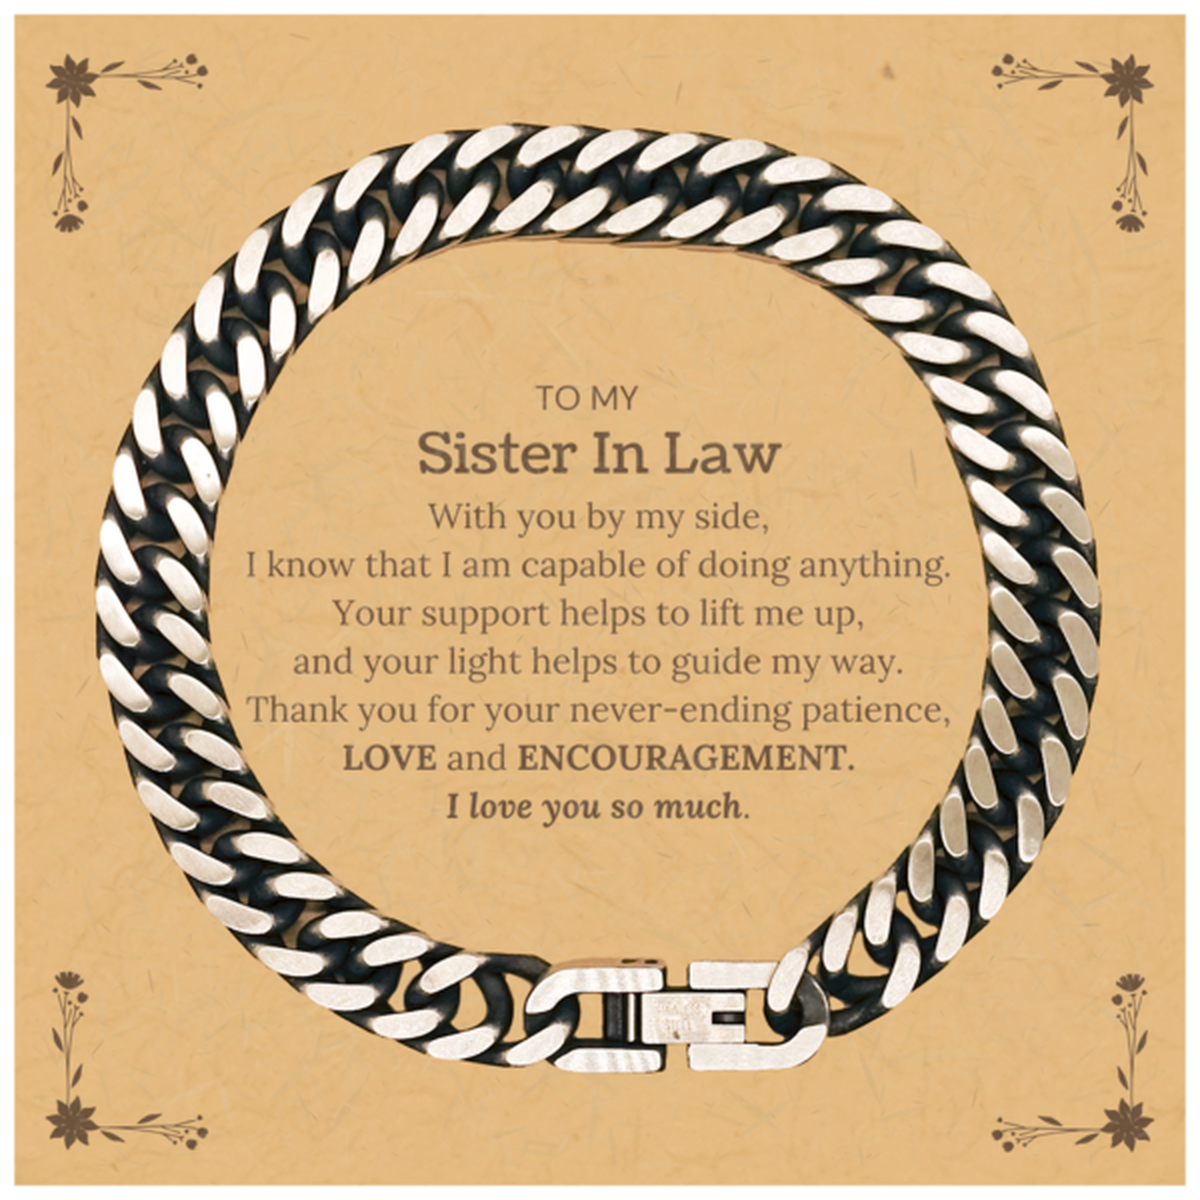 Appreciation Sister In Law Cuban Link Chain Bracelet Gifts, To My Sister In Law Birthday Christmas Wedding Keepsake Gifts for Sister In Law With you by my side, I know that I am capable of doing anything. I love you so much